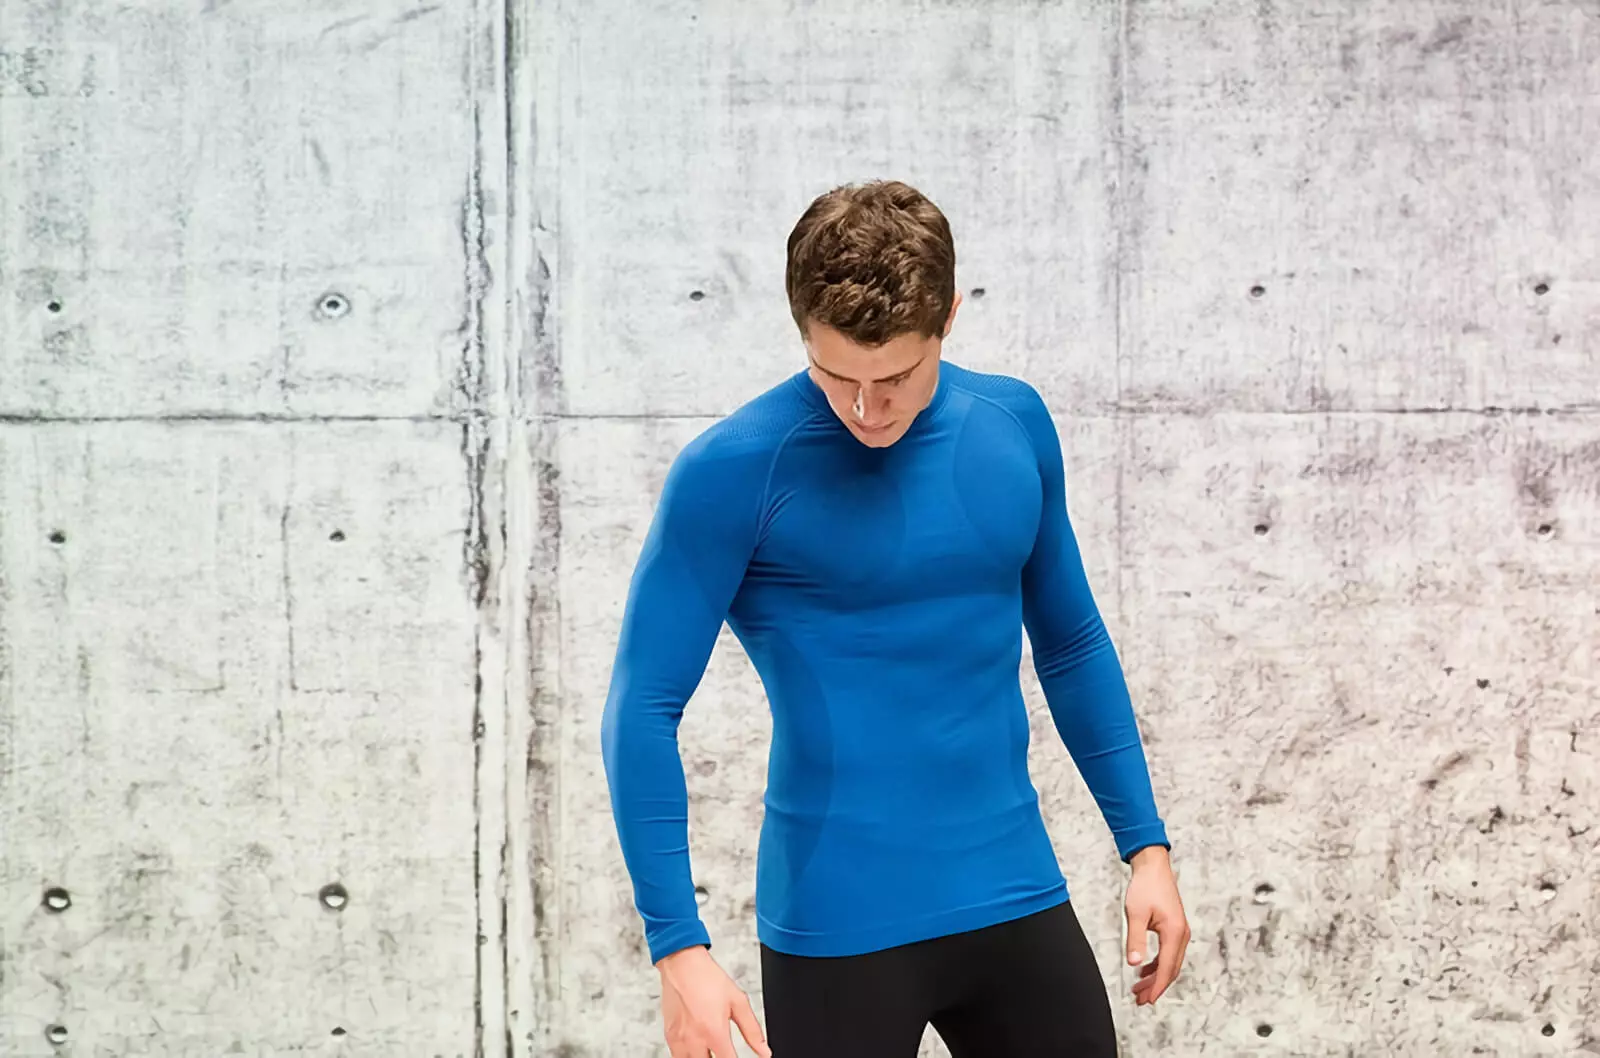 base layer is for moisture management by wicking away the sweats